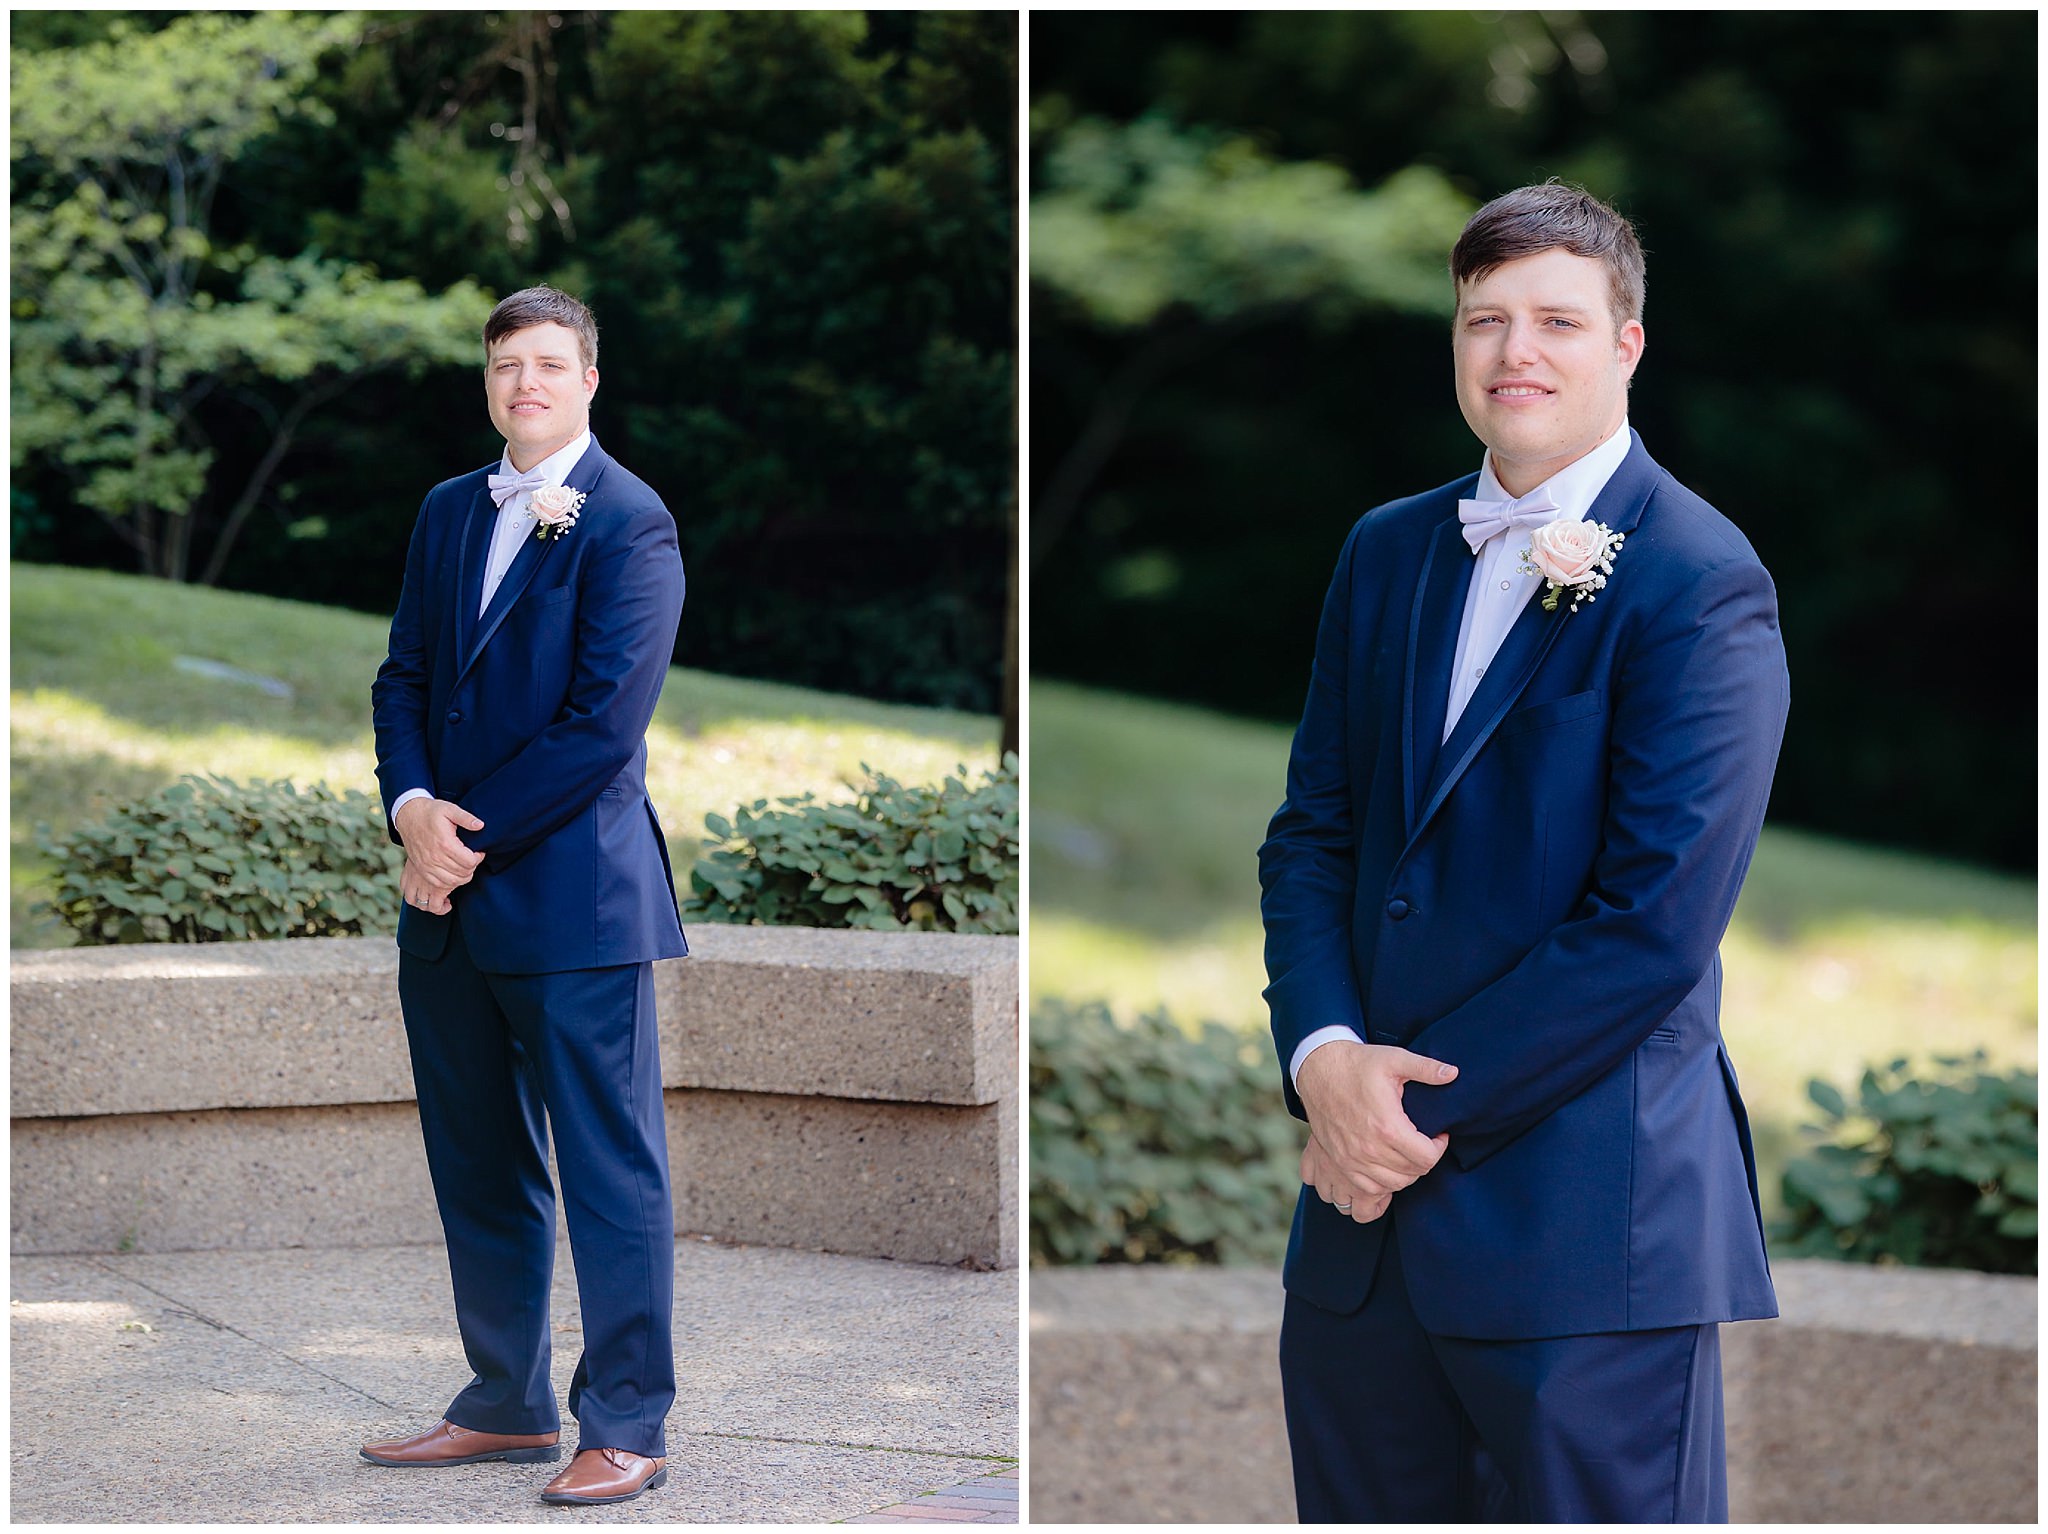 Groom poses in his blue tux from Men's Wearhouse at Duquesne University